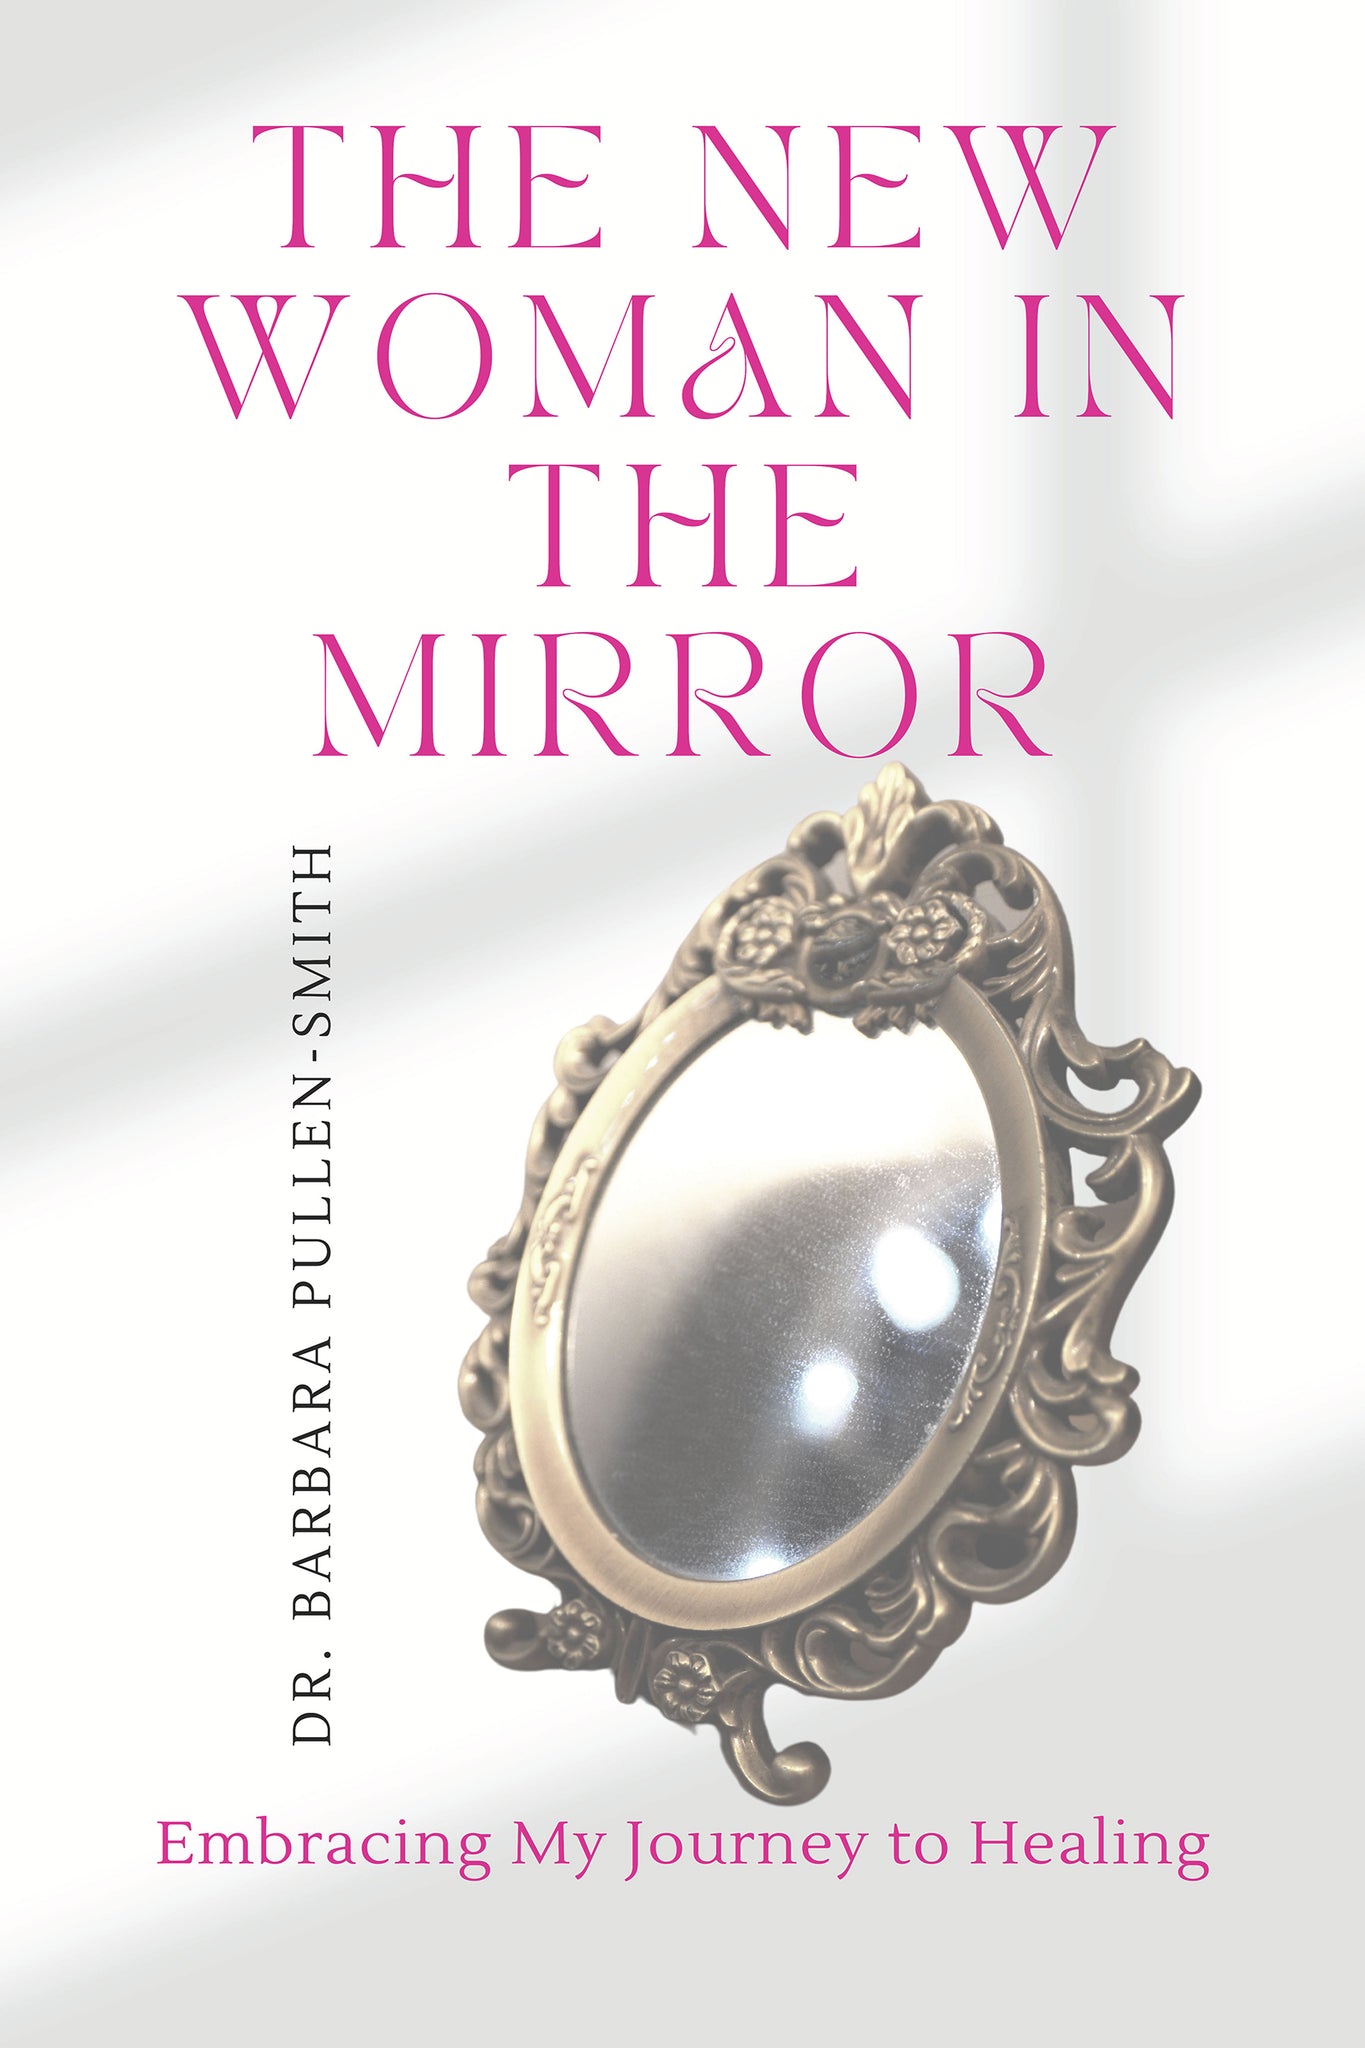 THE NEW WOMAN IN THE MIRROR